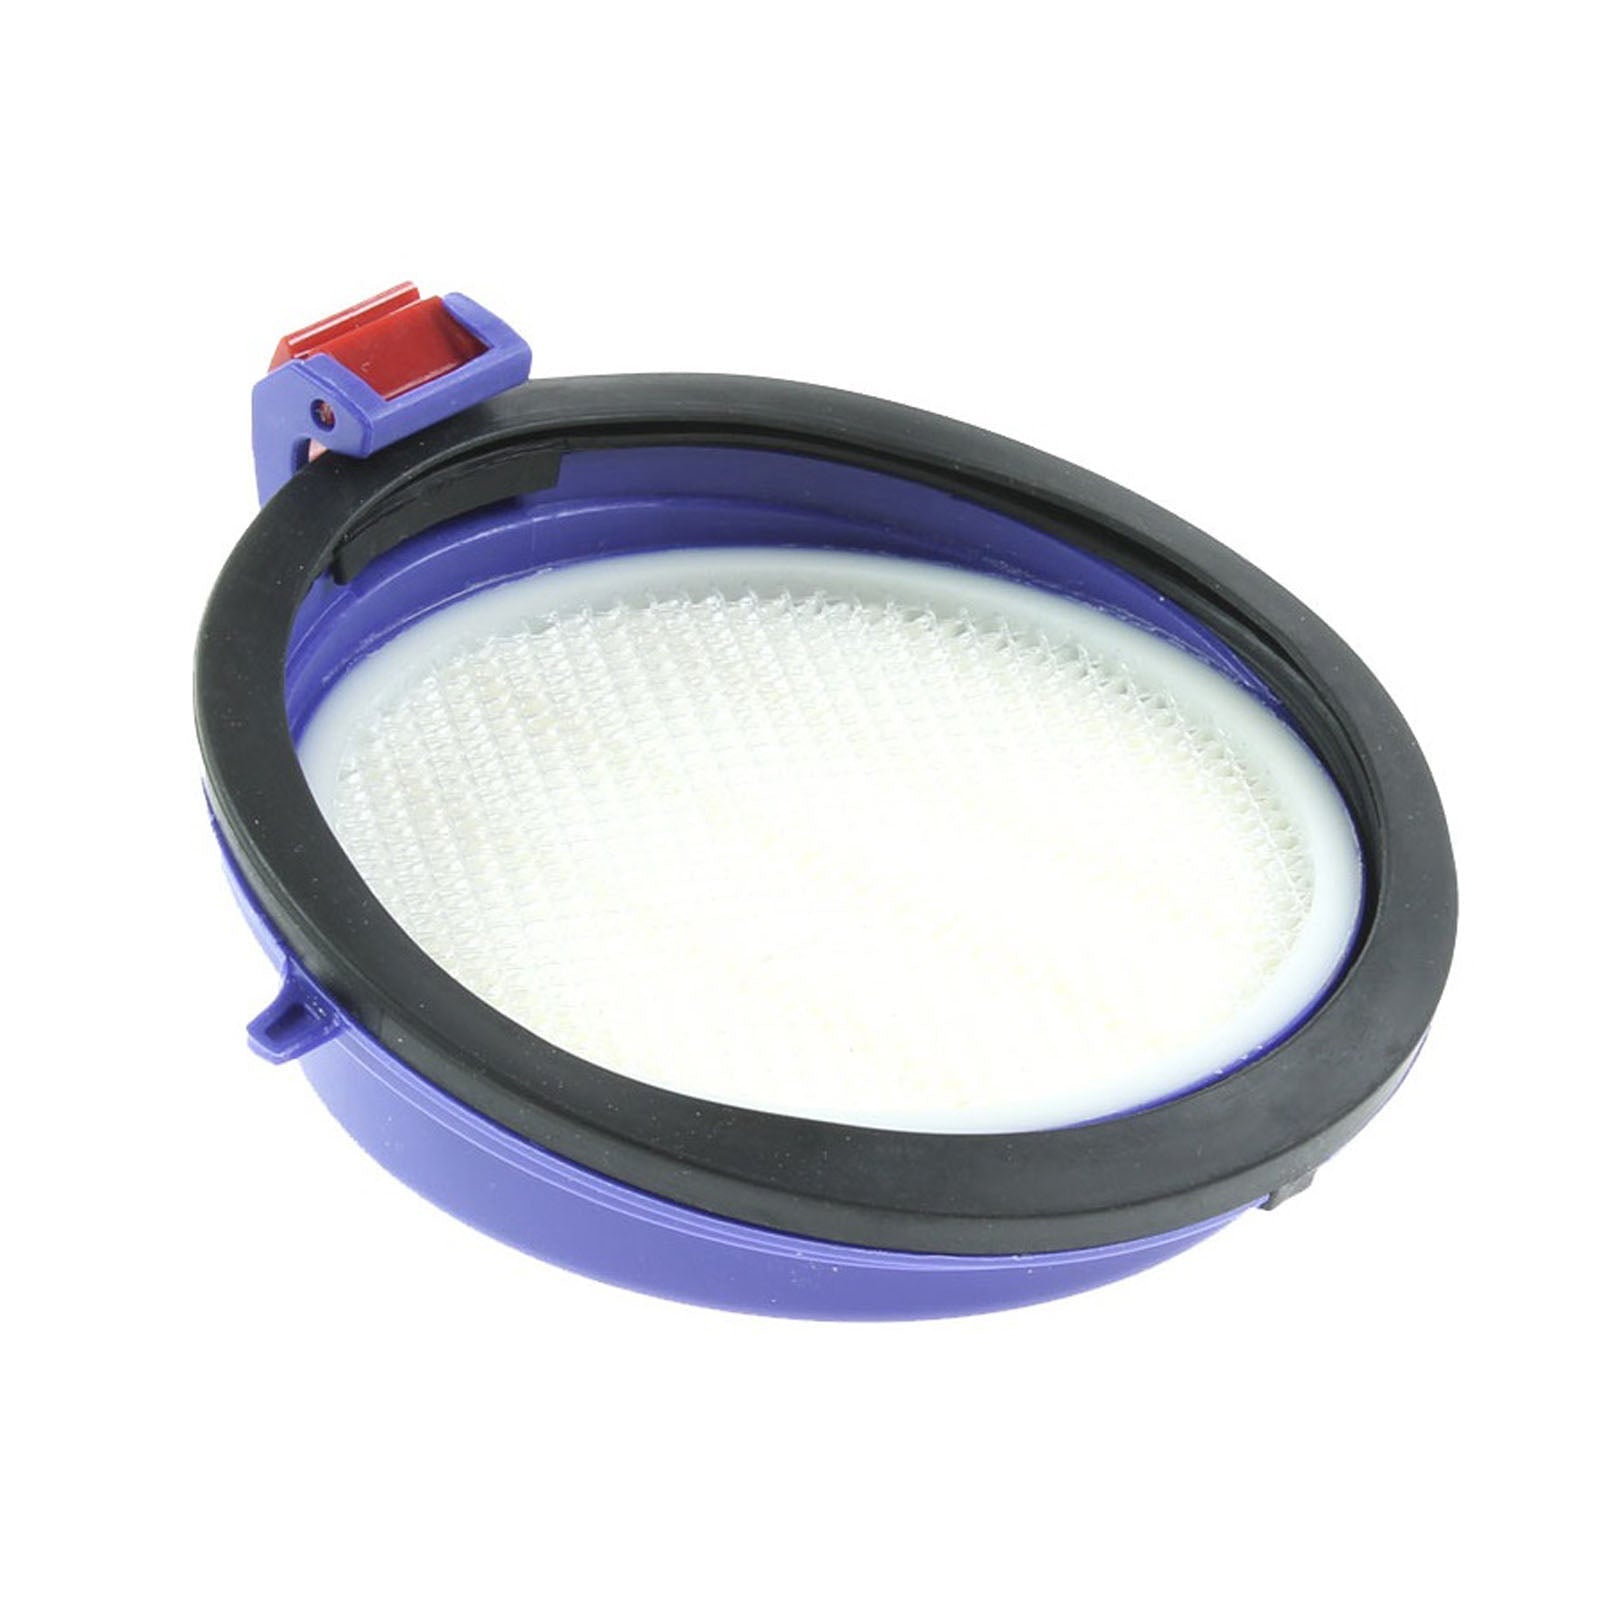 HEPA Post Motor Filter compatible with DYSON DC25 DC25i Vacuum + Fresheners